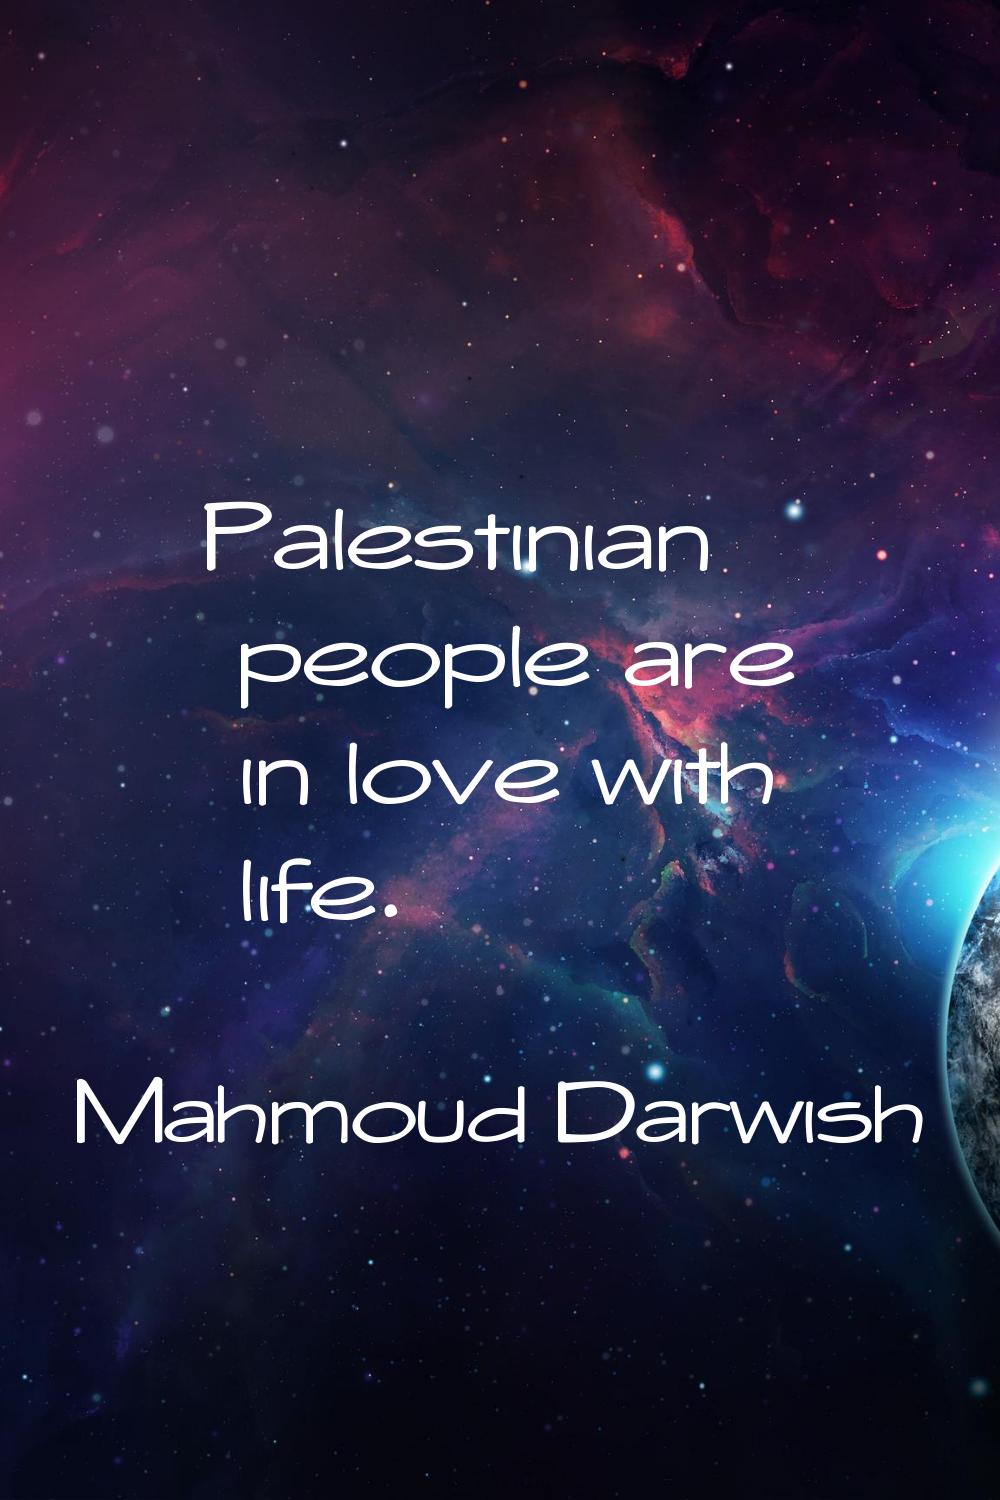 Palestinian people are in love with life.